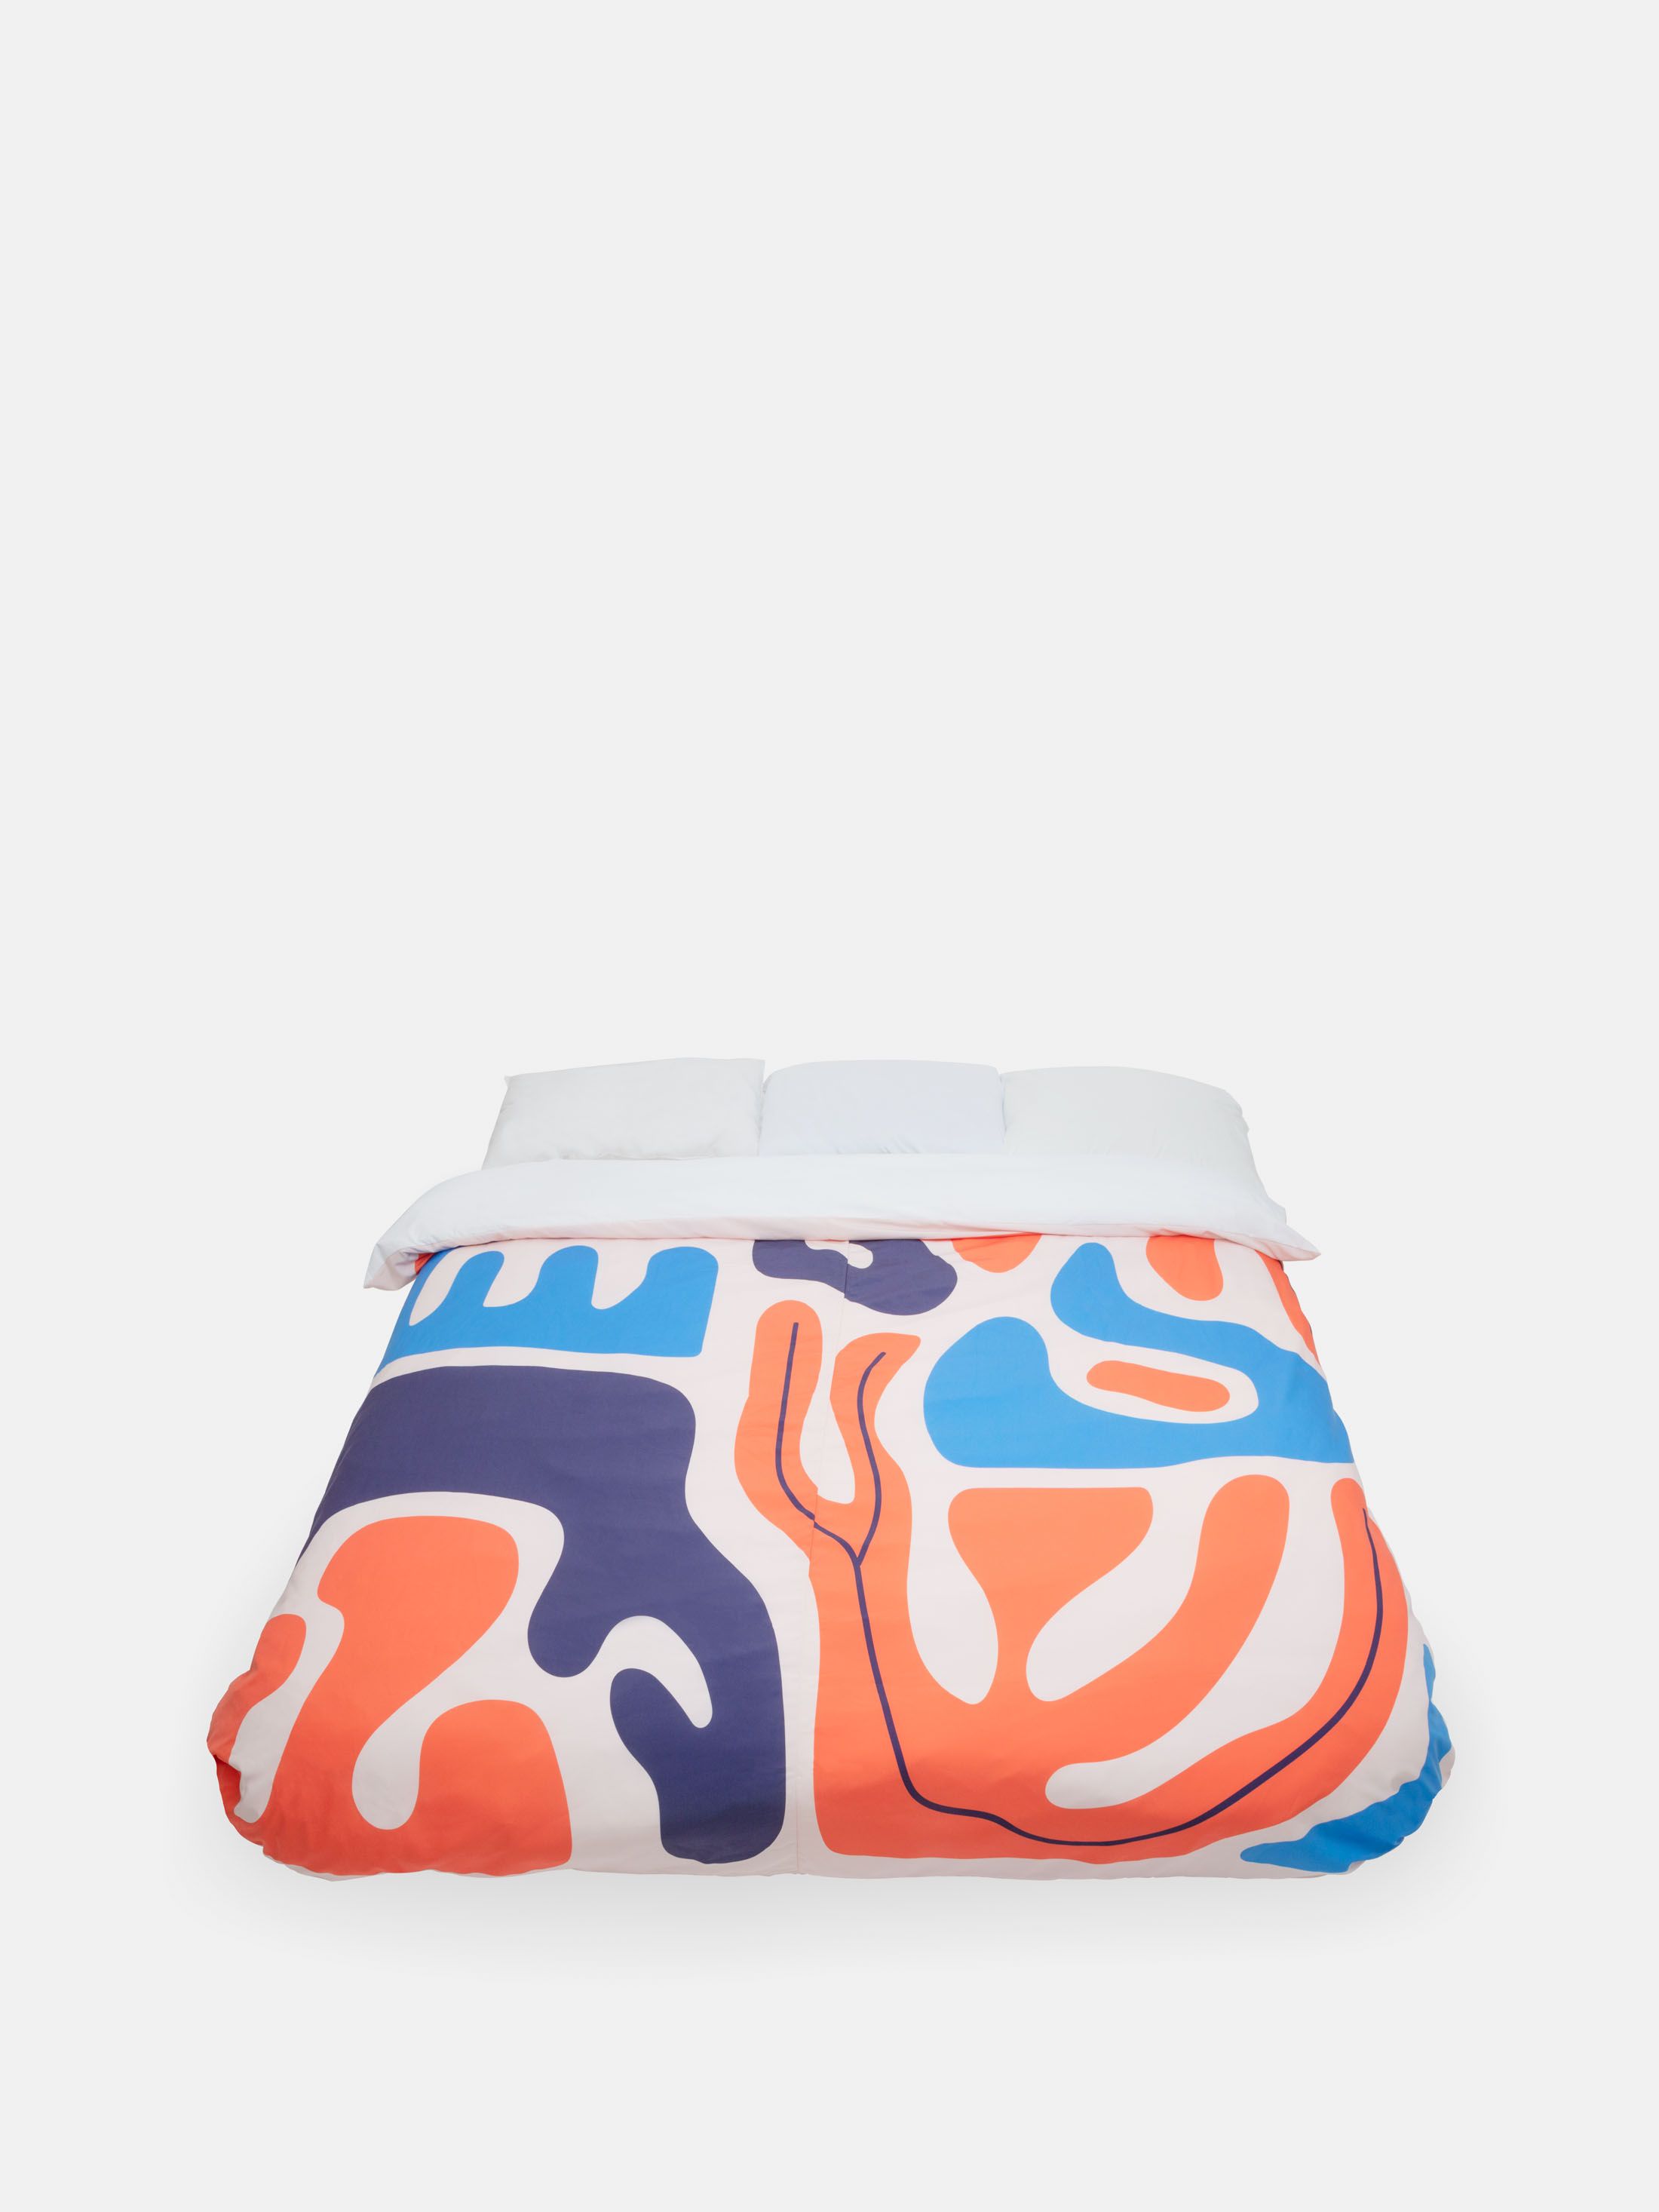 duvet covers custom printed with your designs